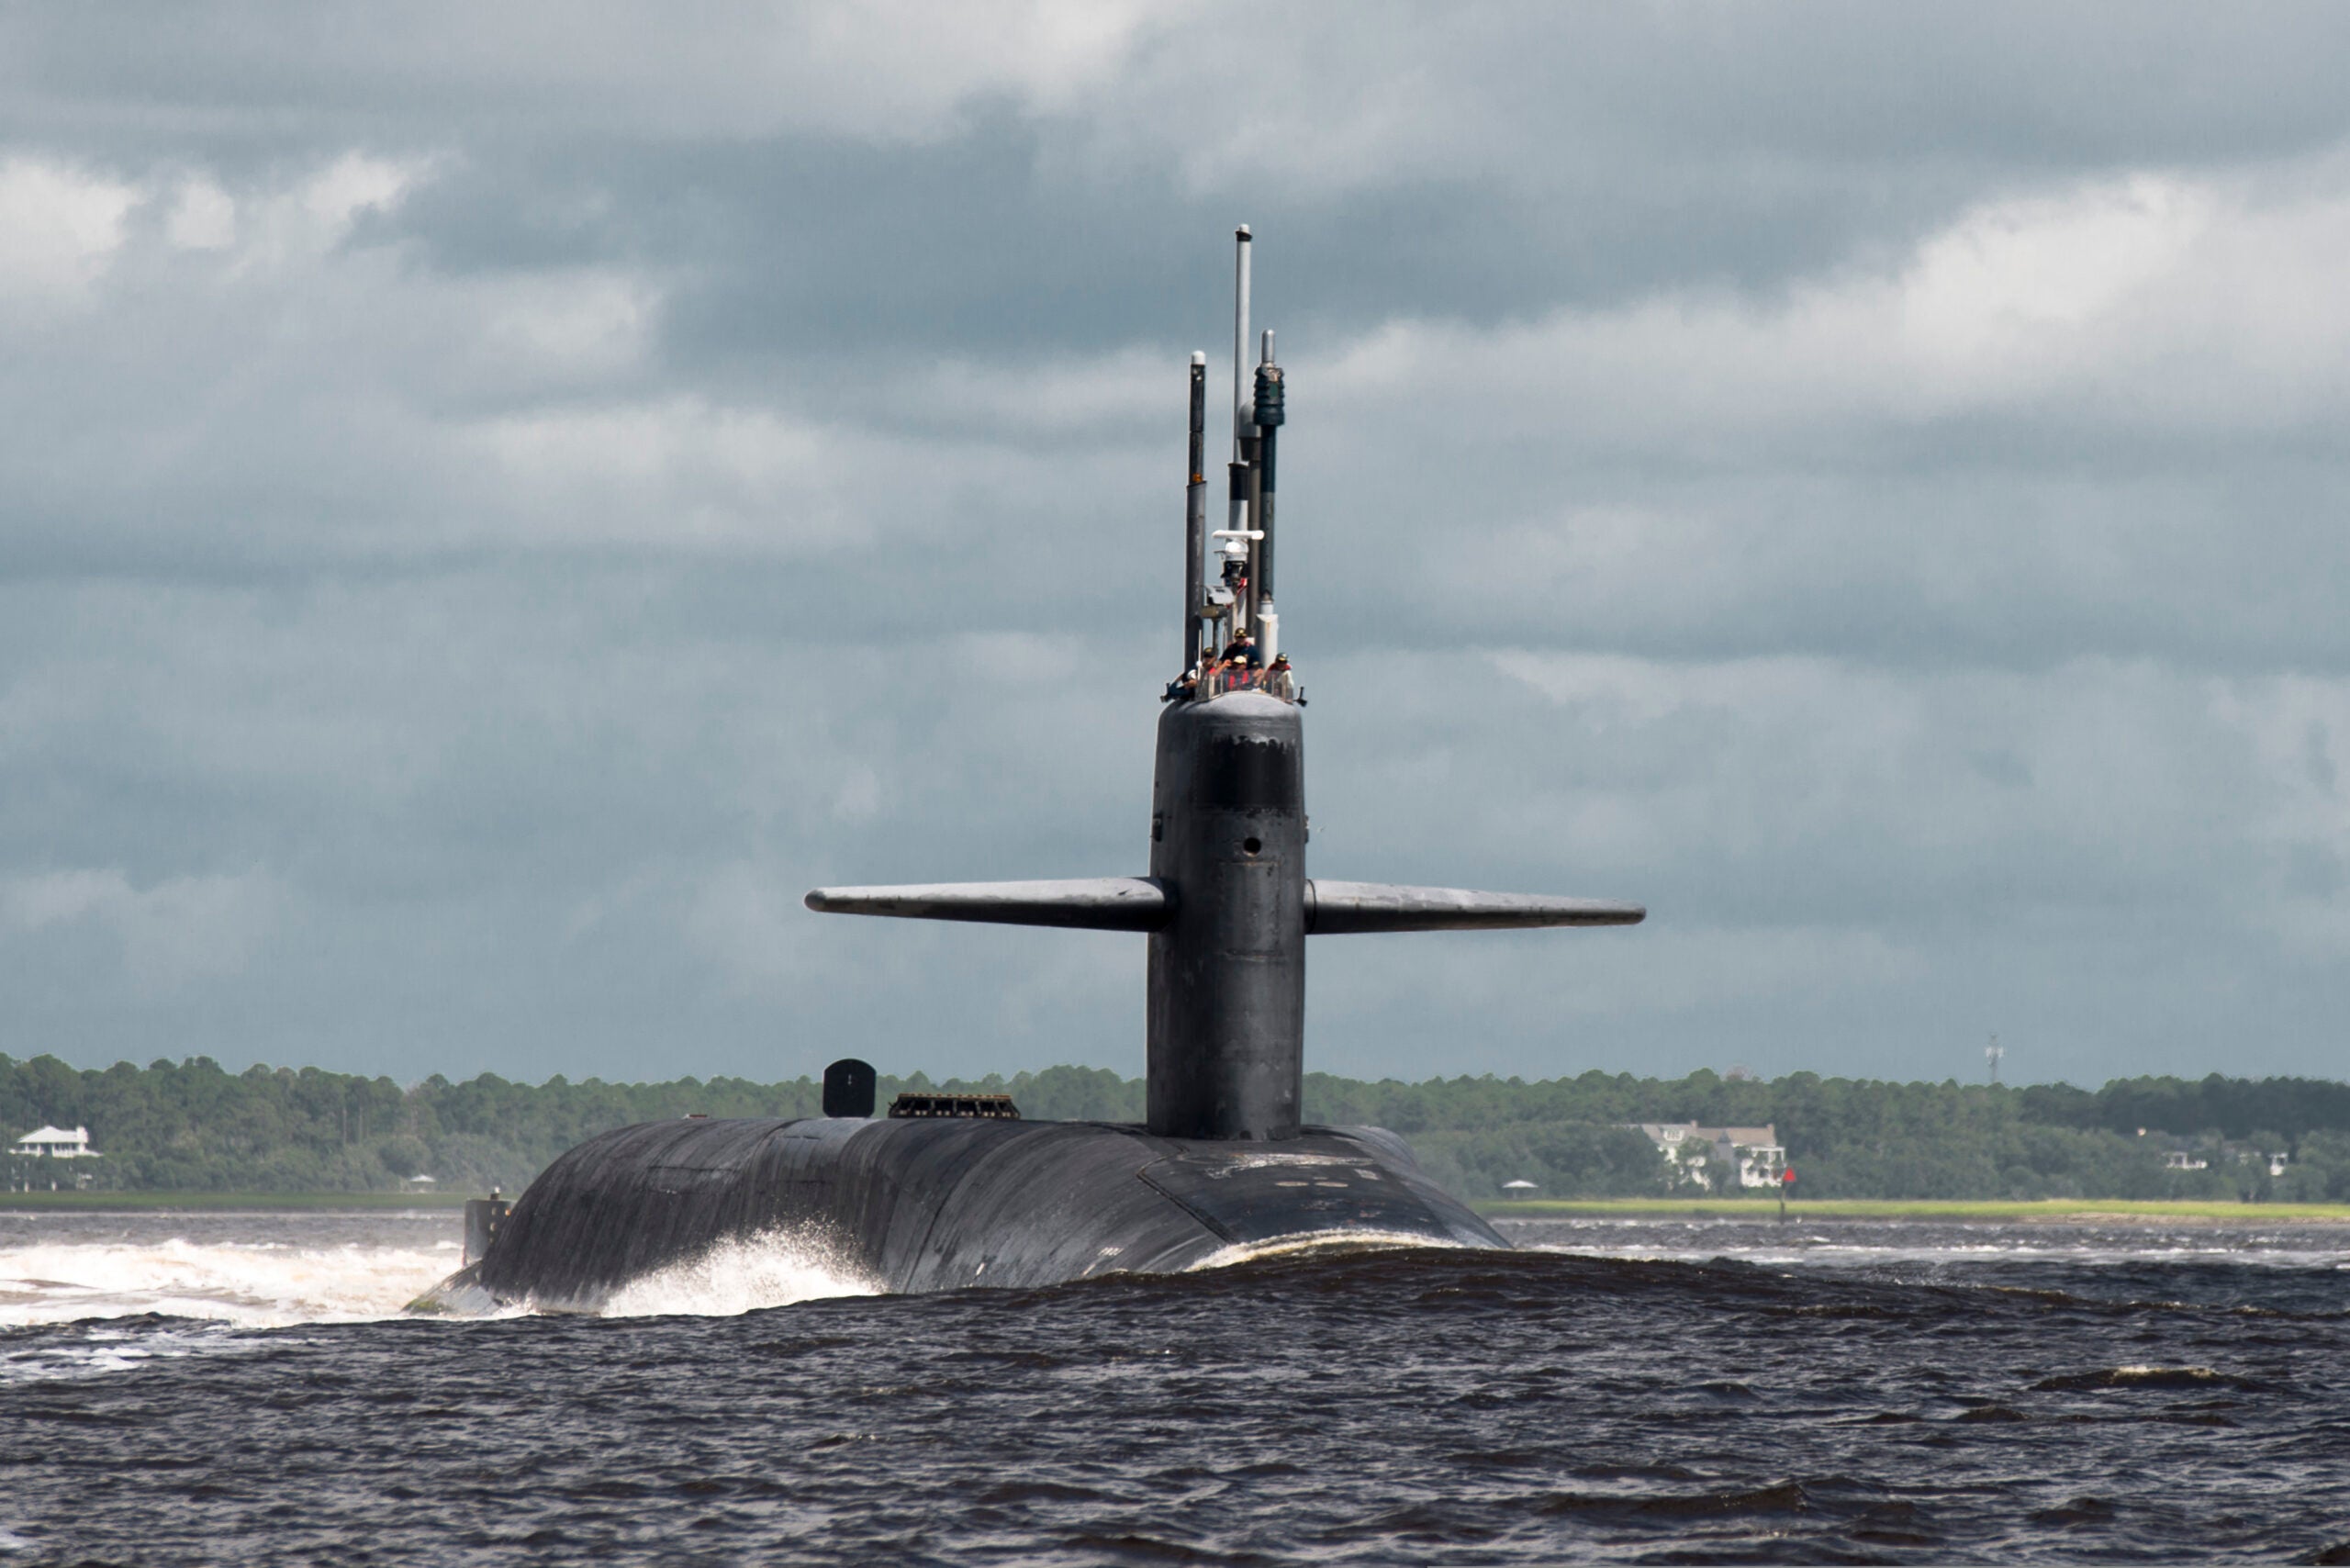 130703-N-FG395-083.KINGS BAY, Ga. (July 3, 2013) The Ohio-class guided-missile submarine USS Florida (SSGN 728) departs Naval Submarine Base Kings Bay. Florida will perform routine operations while at sea. (U.S. Navy photo by Mass Communication Specialist 1st Class James Kimber/Released)